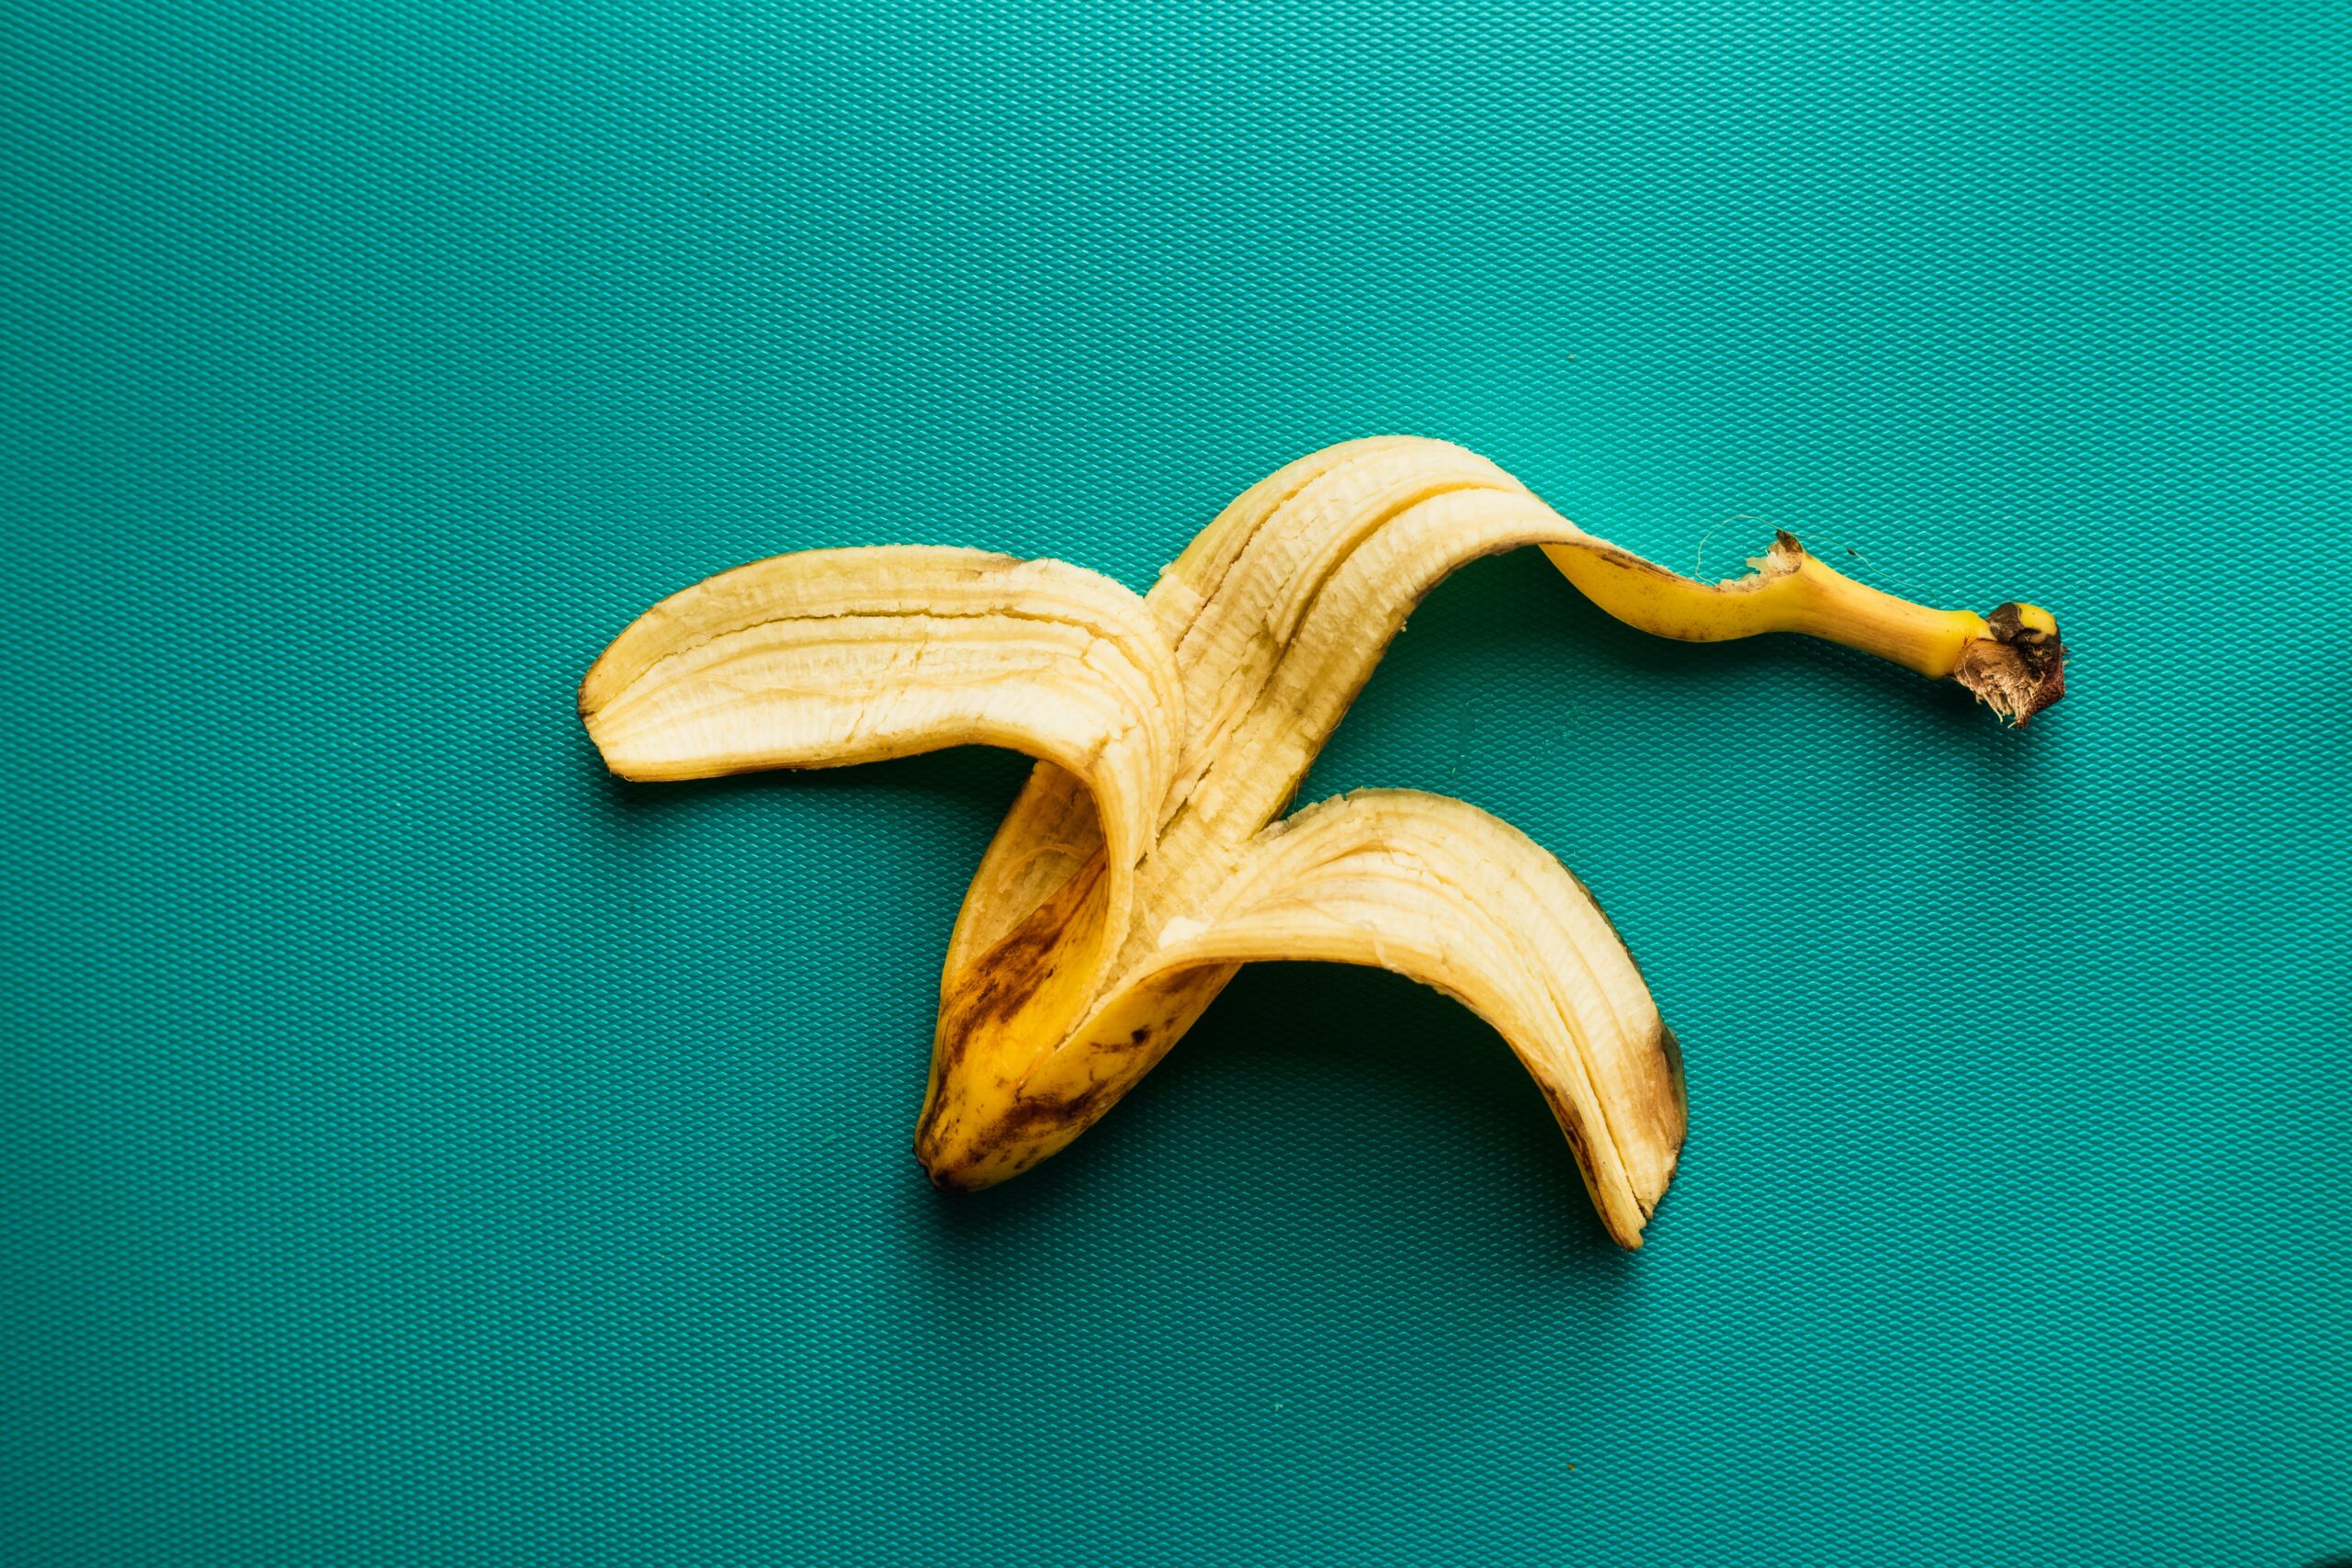 Get that rotten banana peel out of the plastic recycling